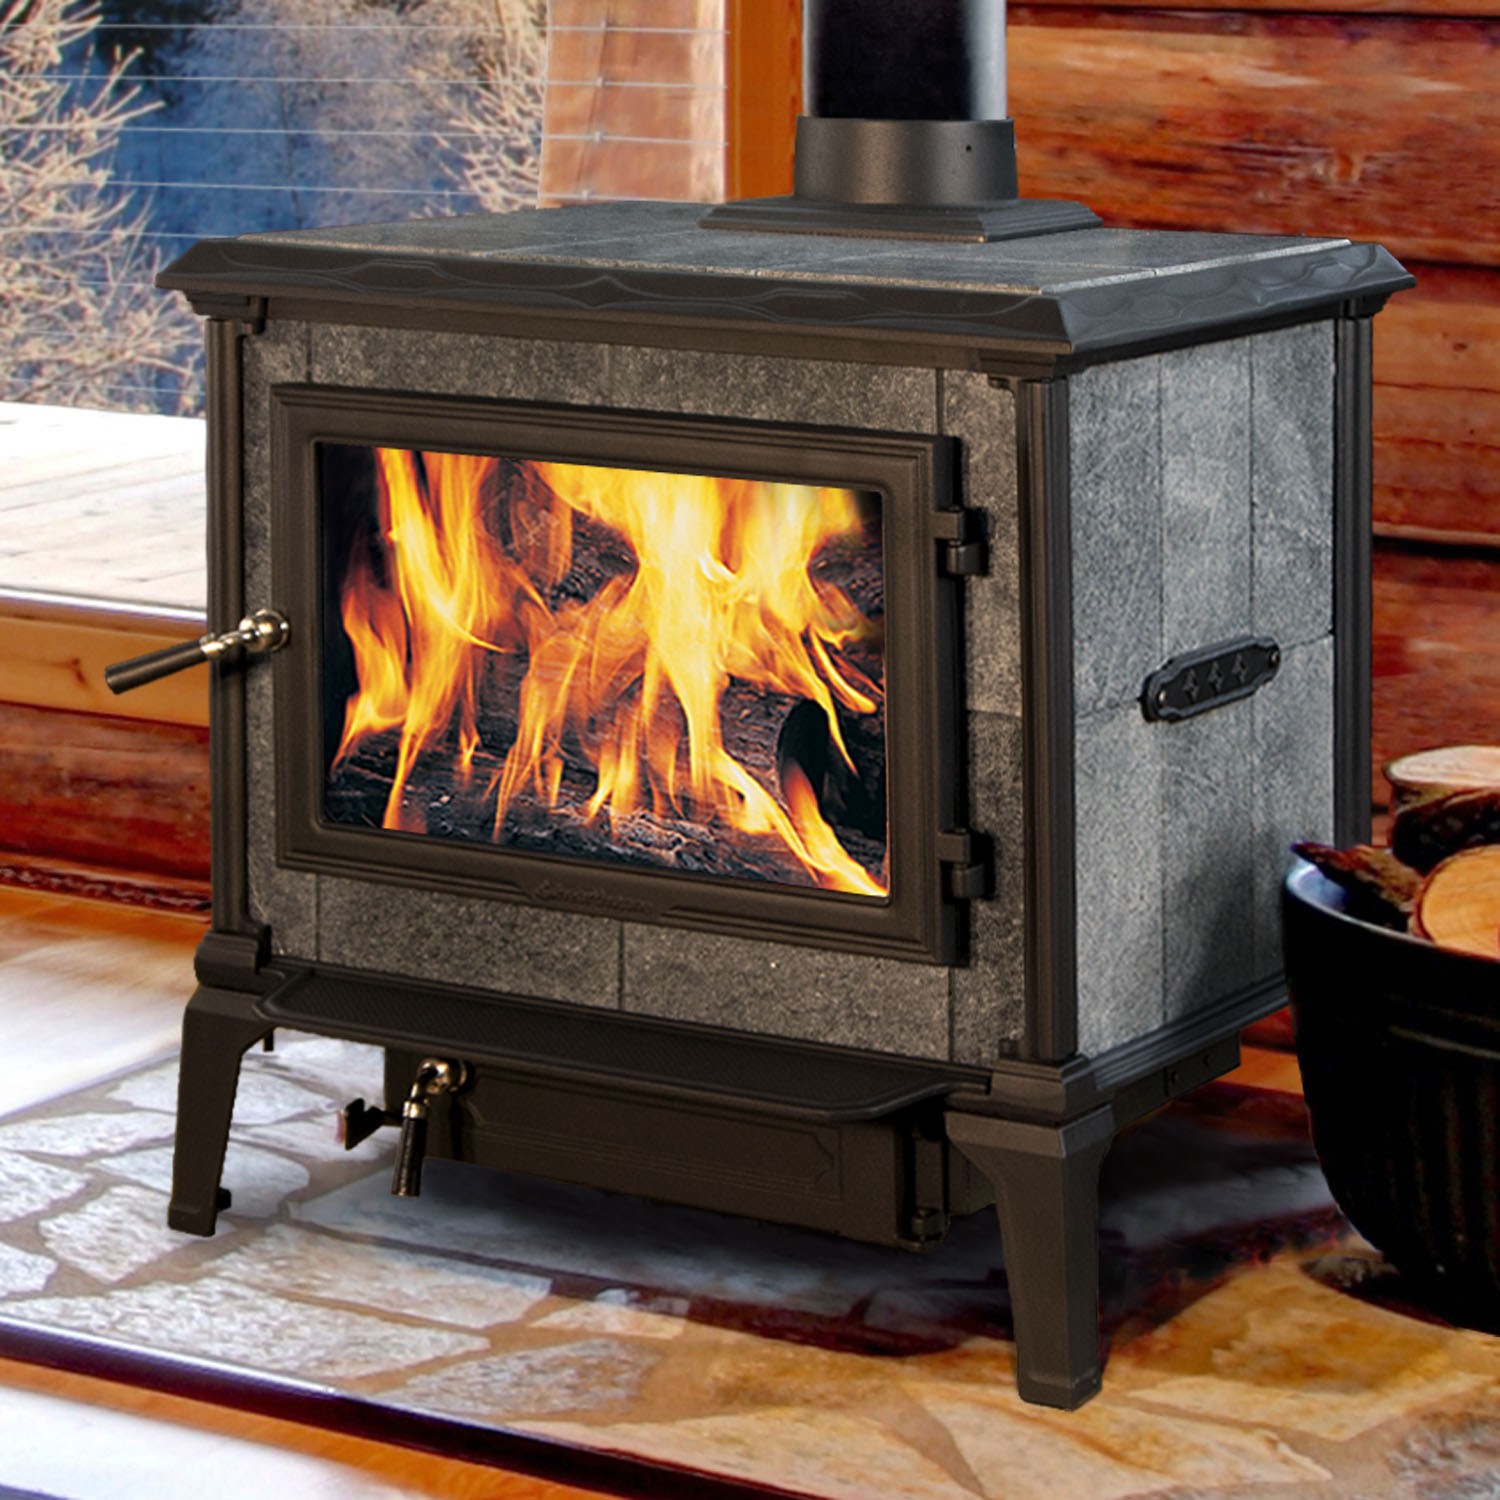 Mansfield 8012 Wood Stove